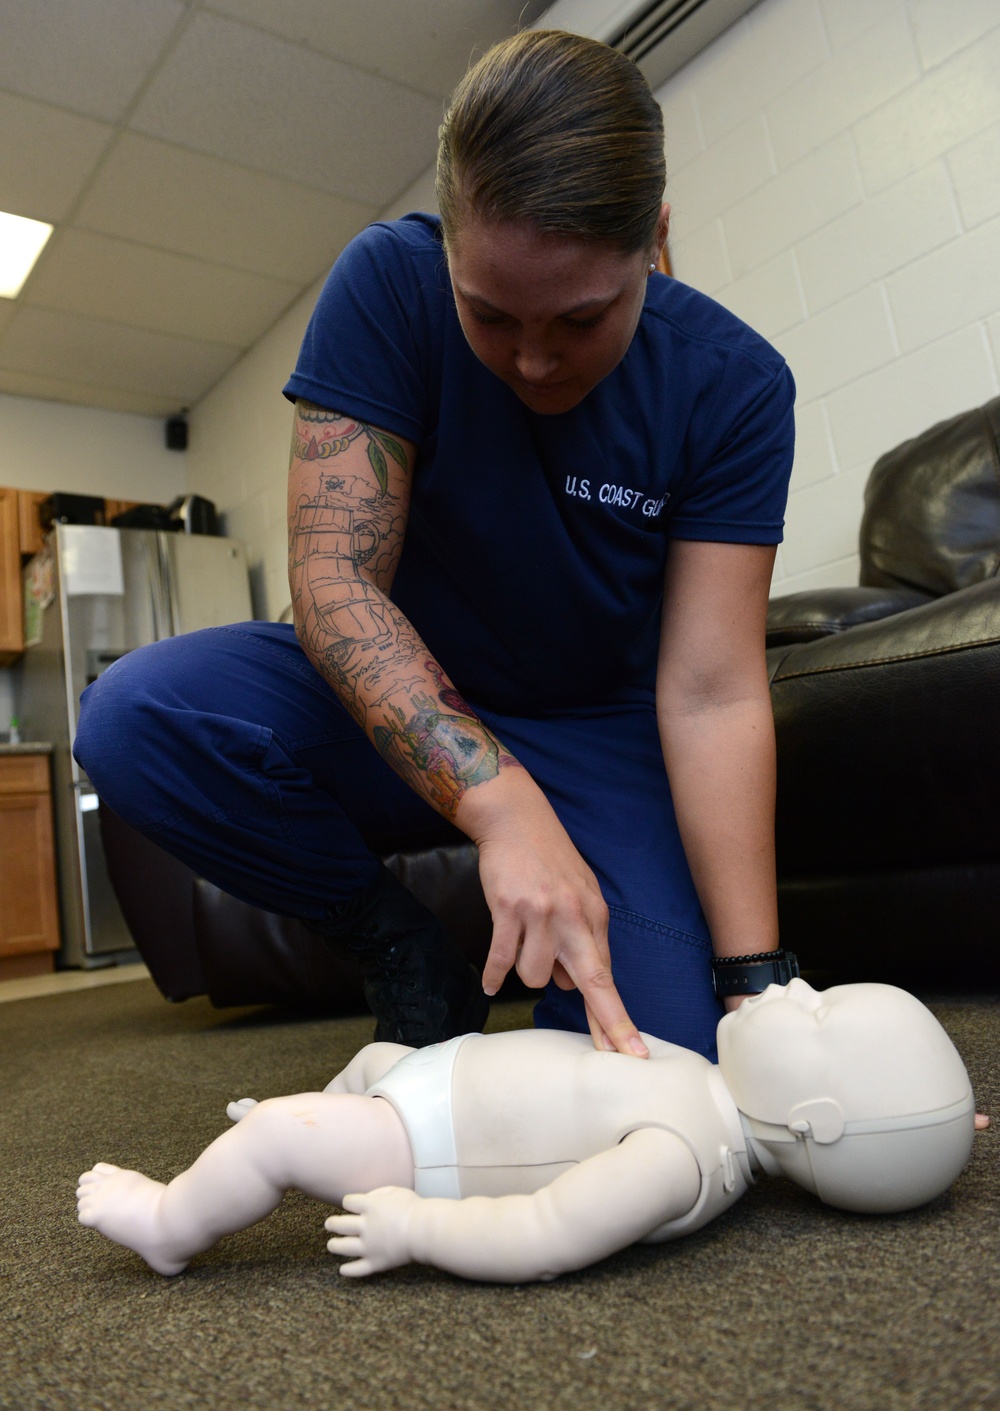 Coast Guard Station Honolulu conducts CPR, AED, basic first aid training